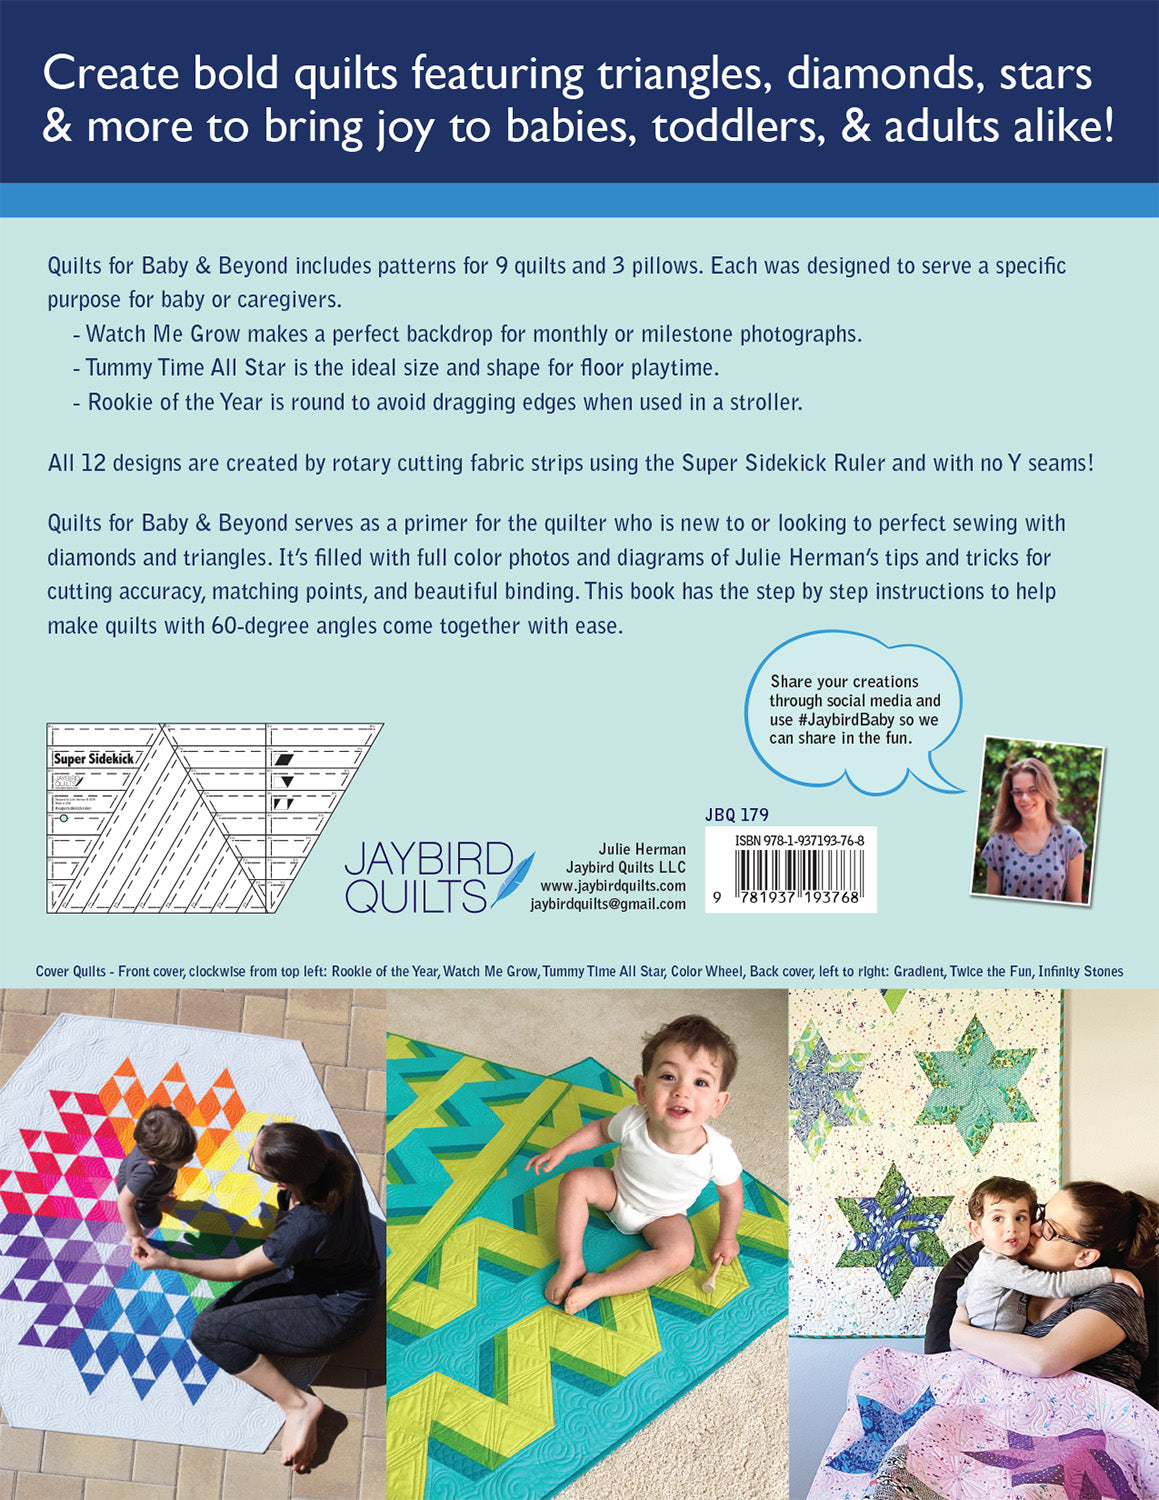 8 NEW Bold Quilt Patterns - New Book! 